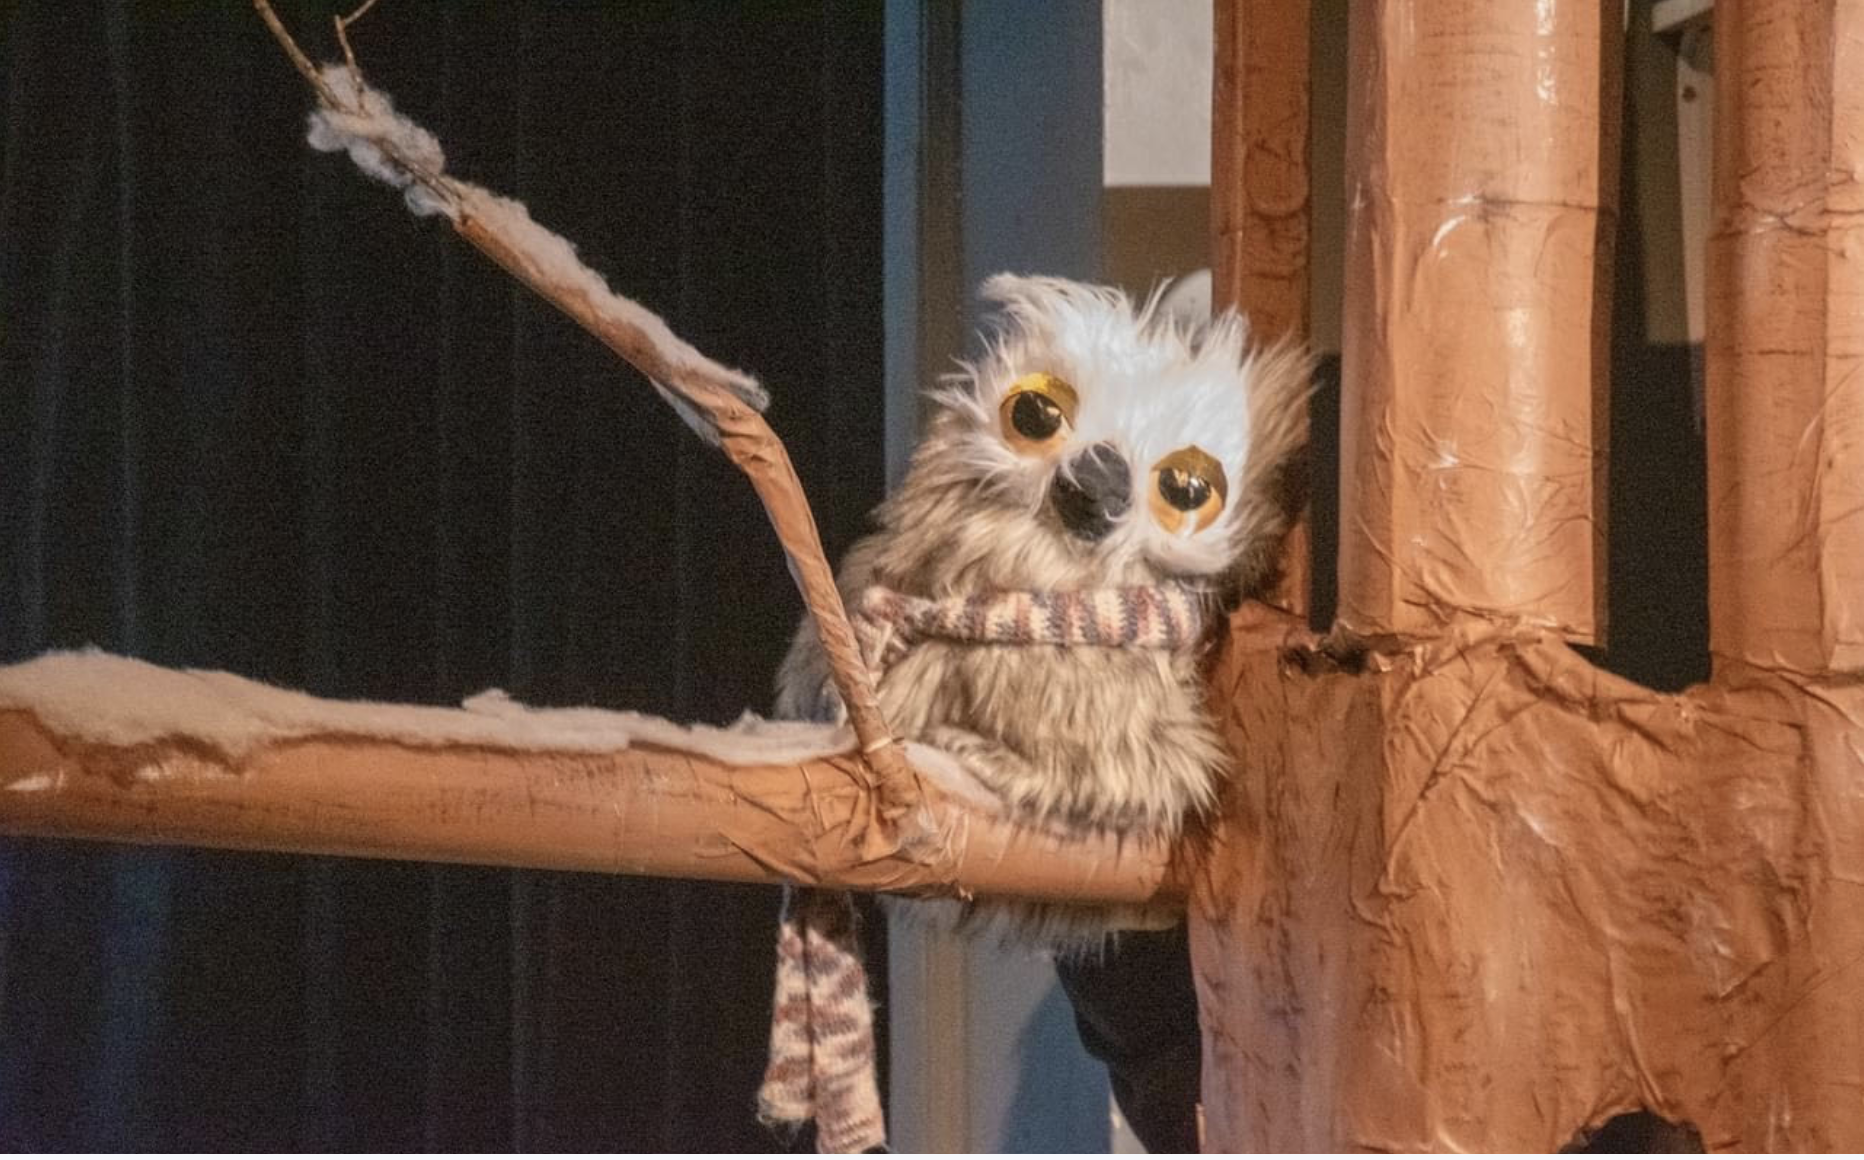 Emmet Otters Jug Band Christmas features many hand-fashioned puppets such as this owl that were built by the crew and actors.